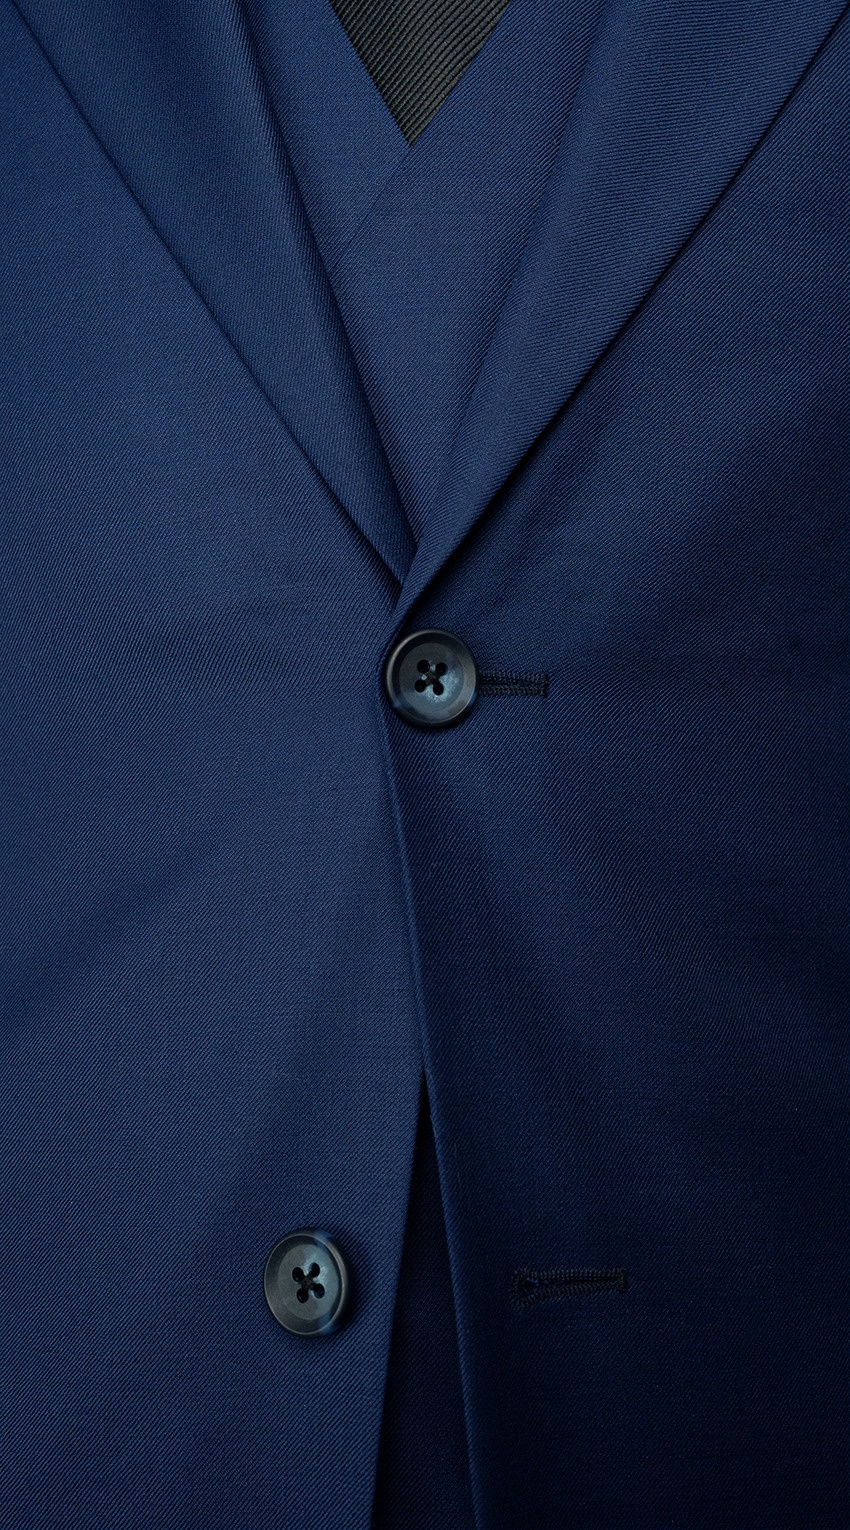 Space Blue Twill Suit